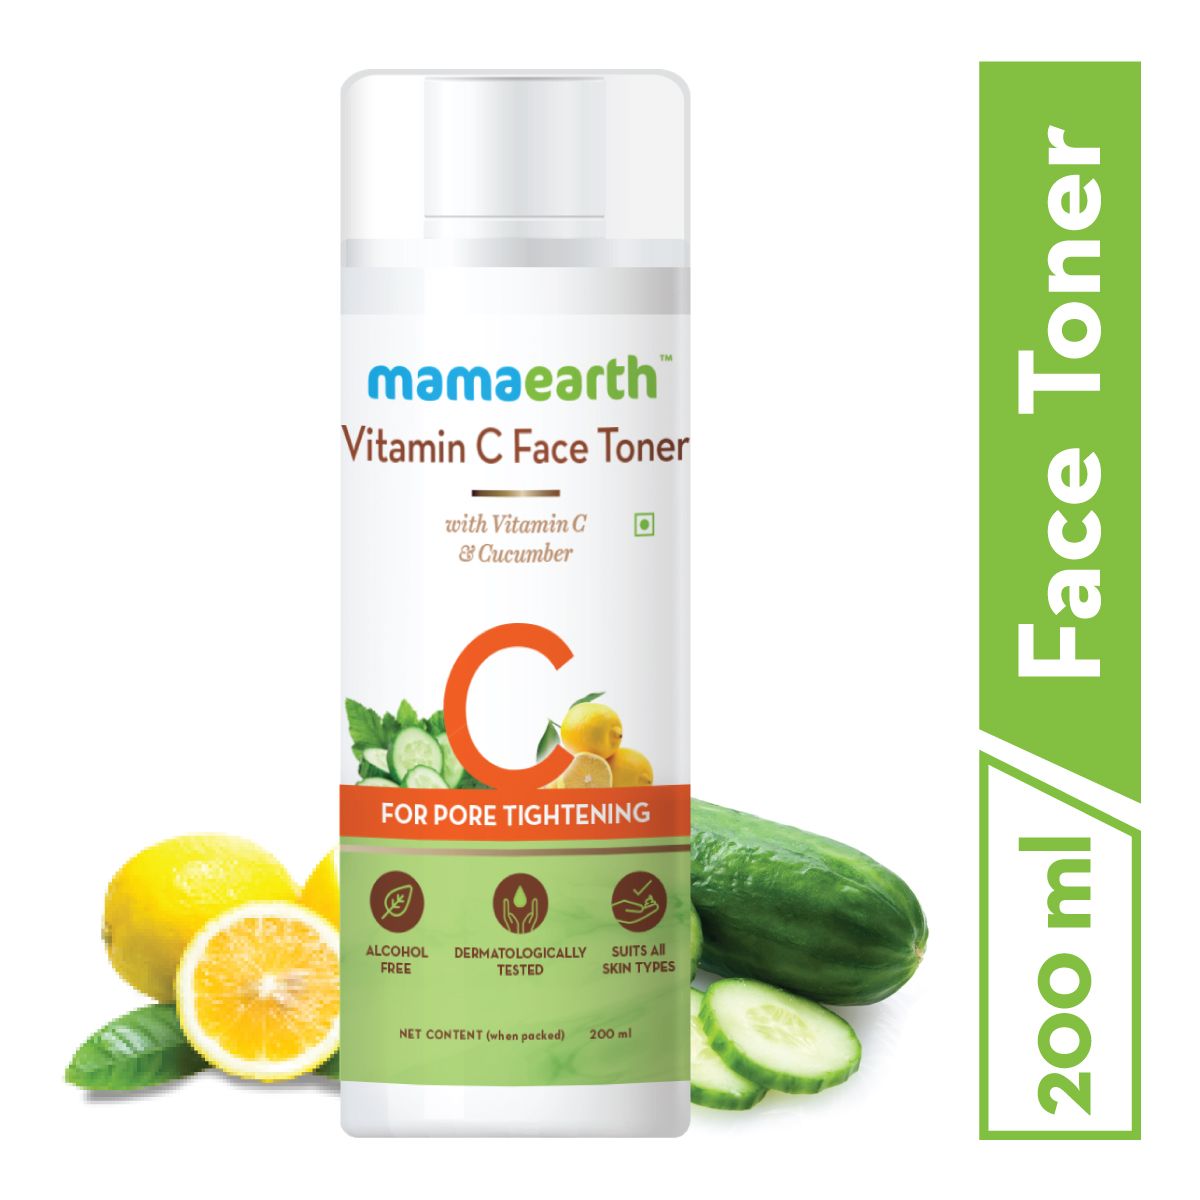 Mamaearth Vitamin C Face Toner Better Than Others Available In The Market